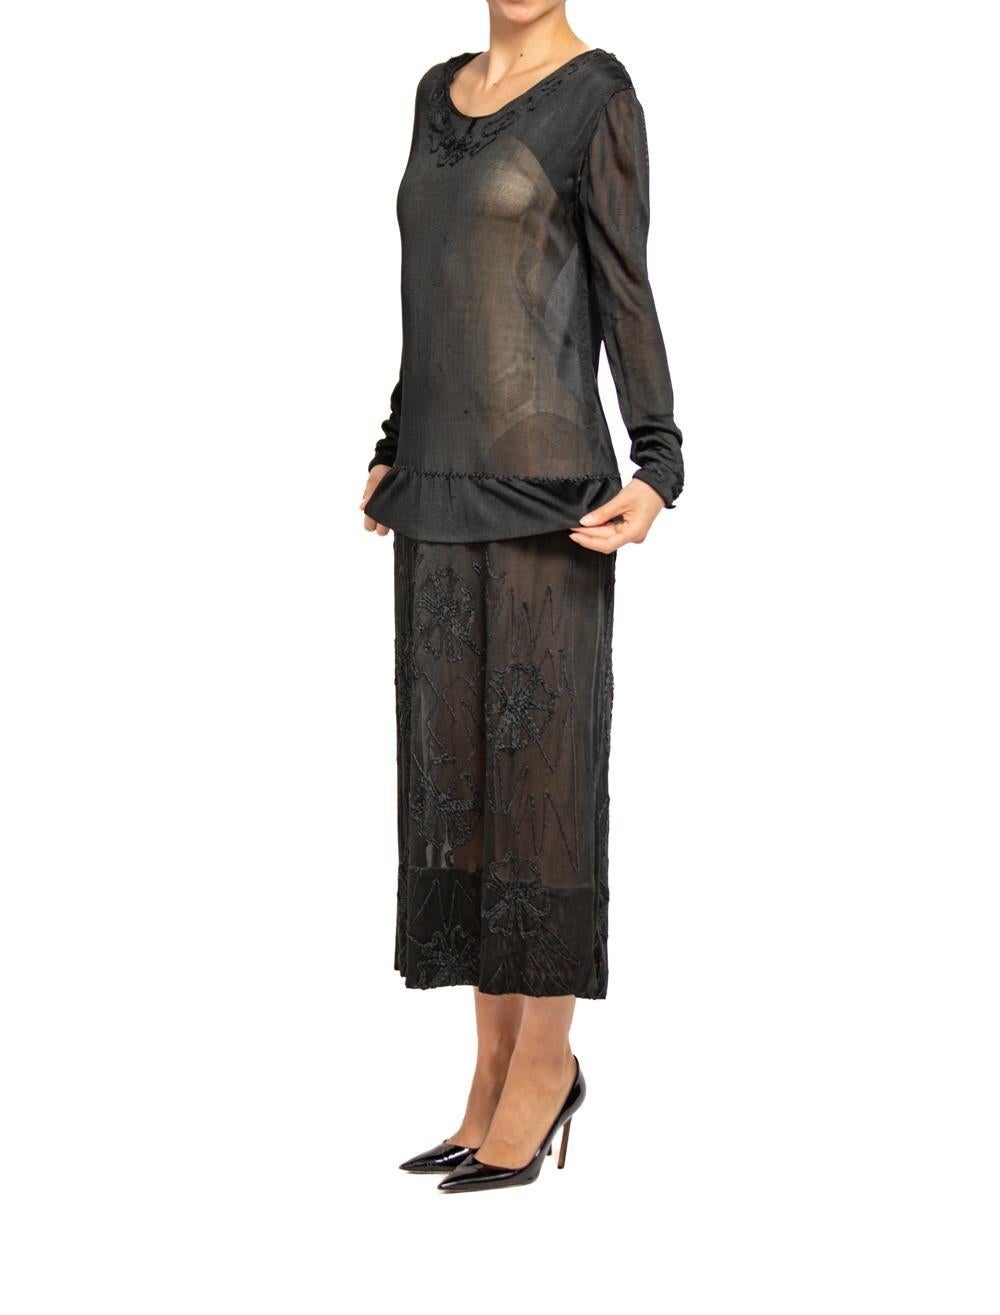 1920S Black Sheer Silk Jersey Dress With Floral Embroidery For Sale 5